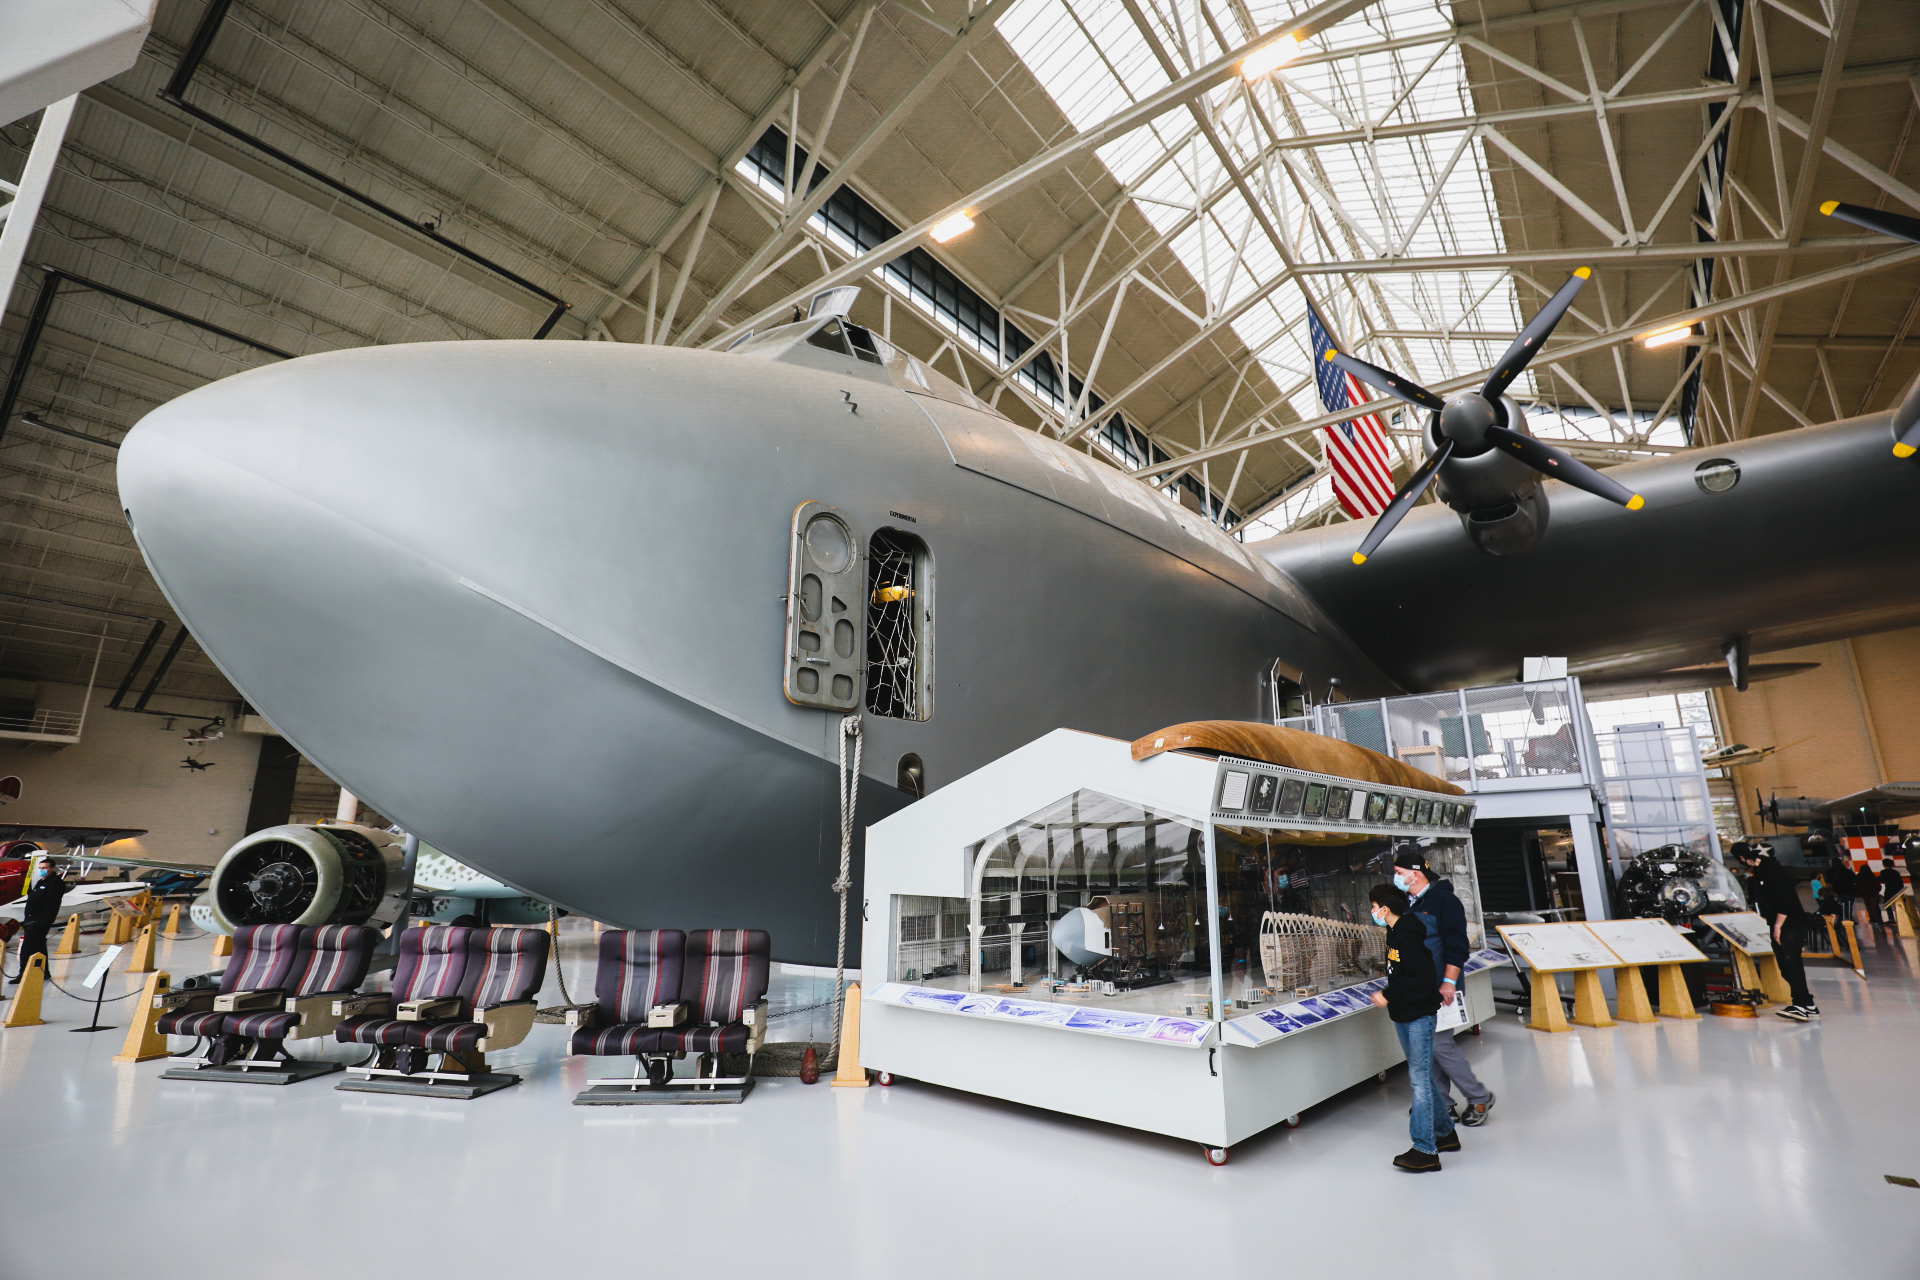 Spruce Goose McMinnville: A Fascinating Aviation Marvel